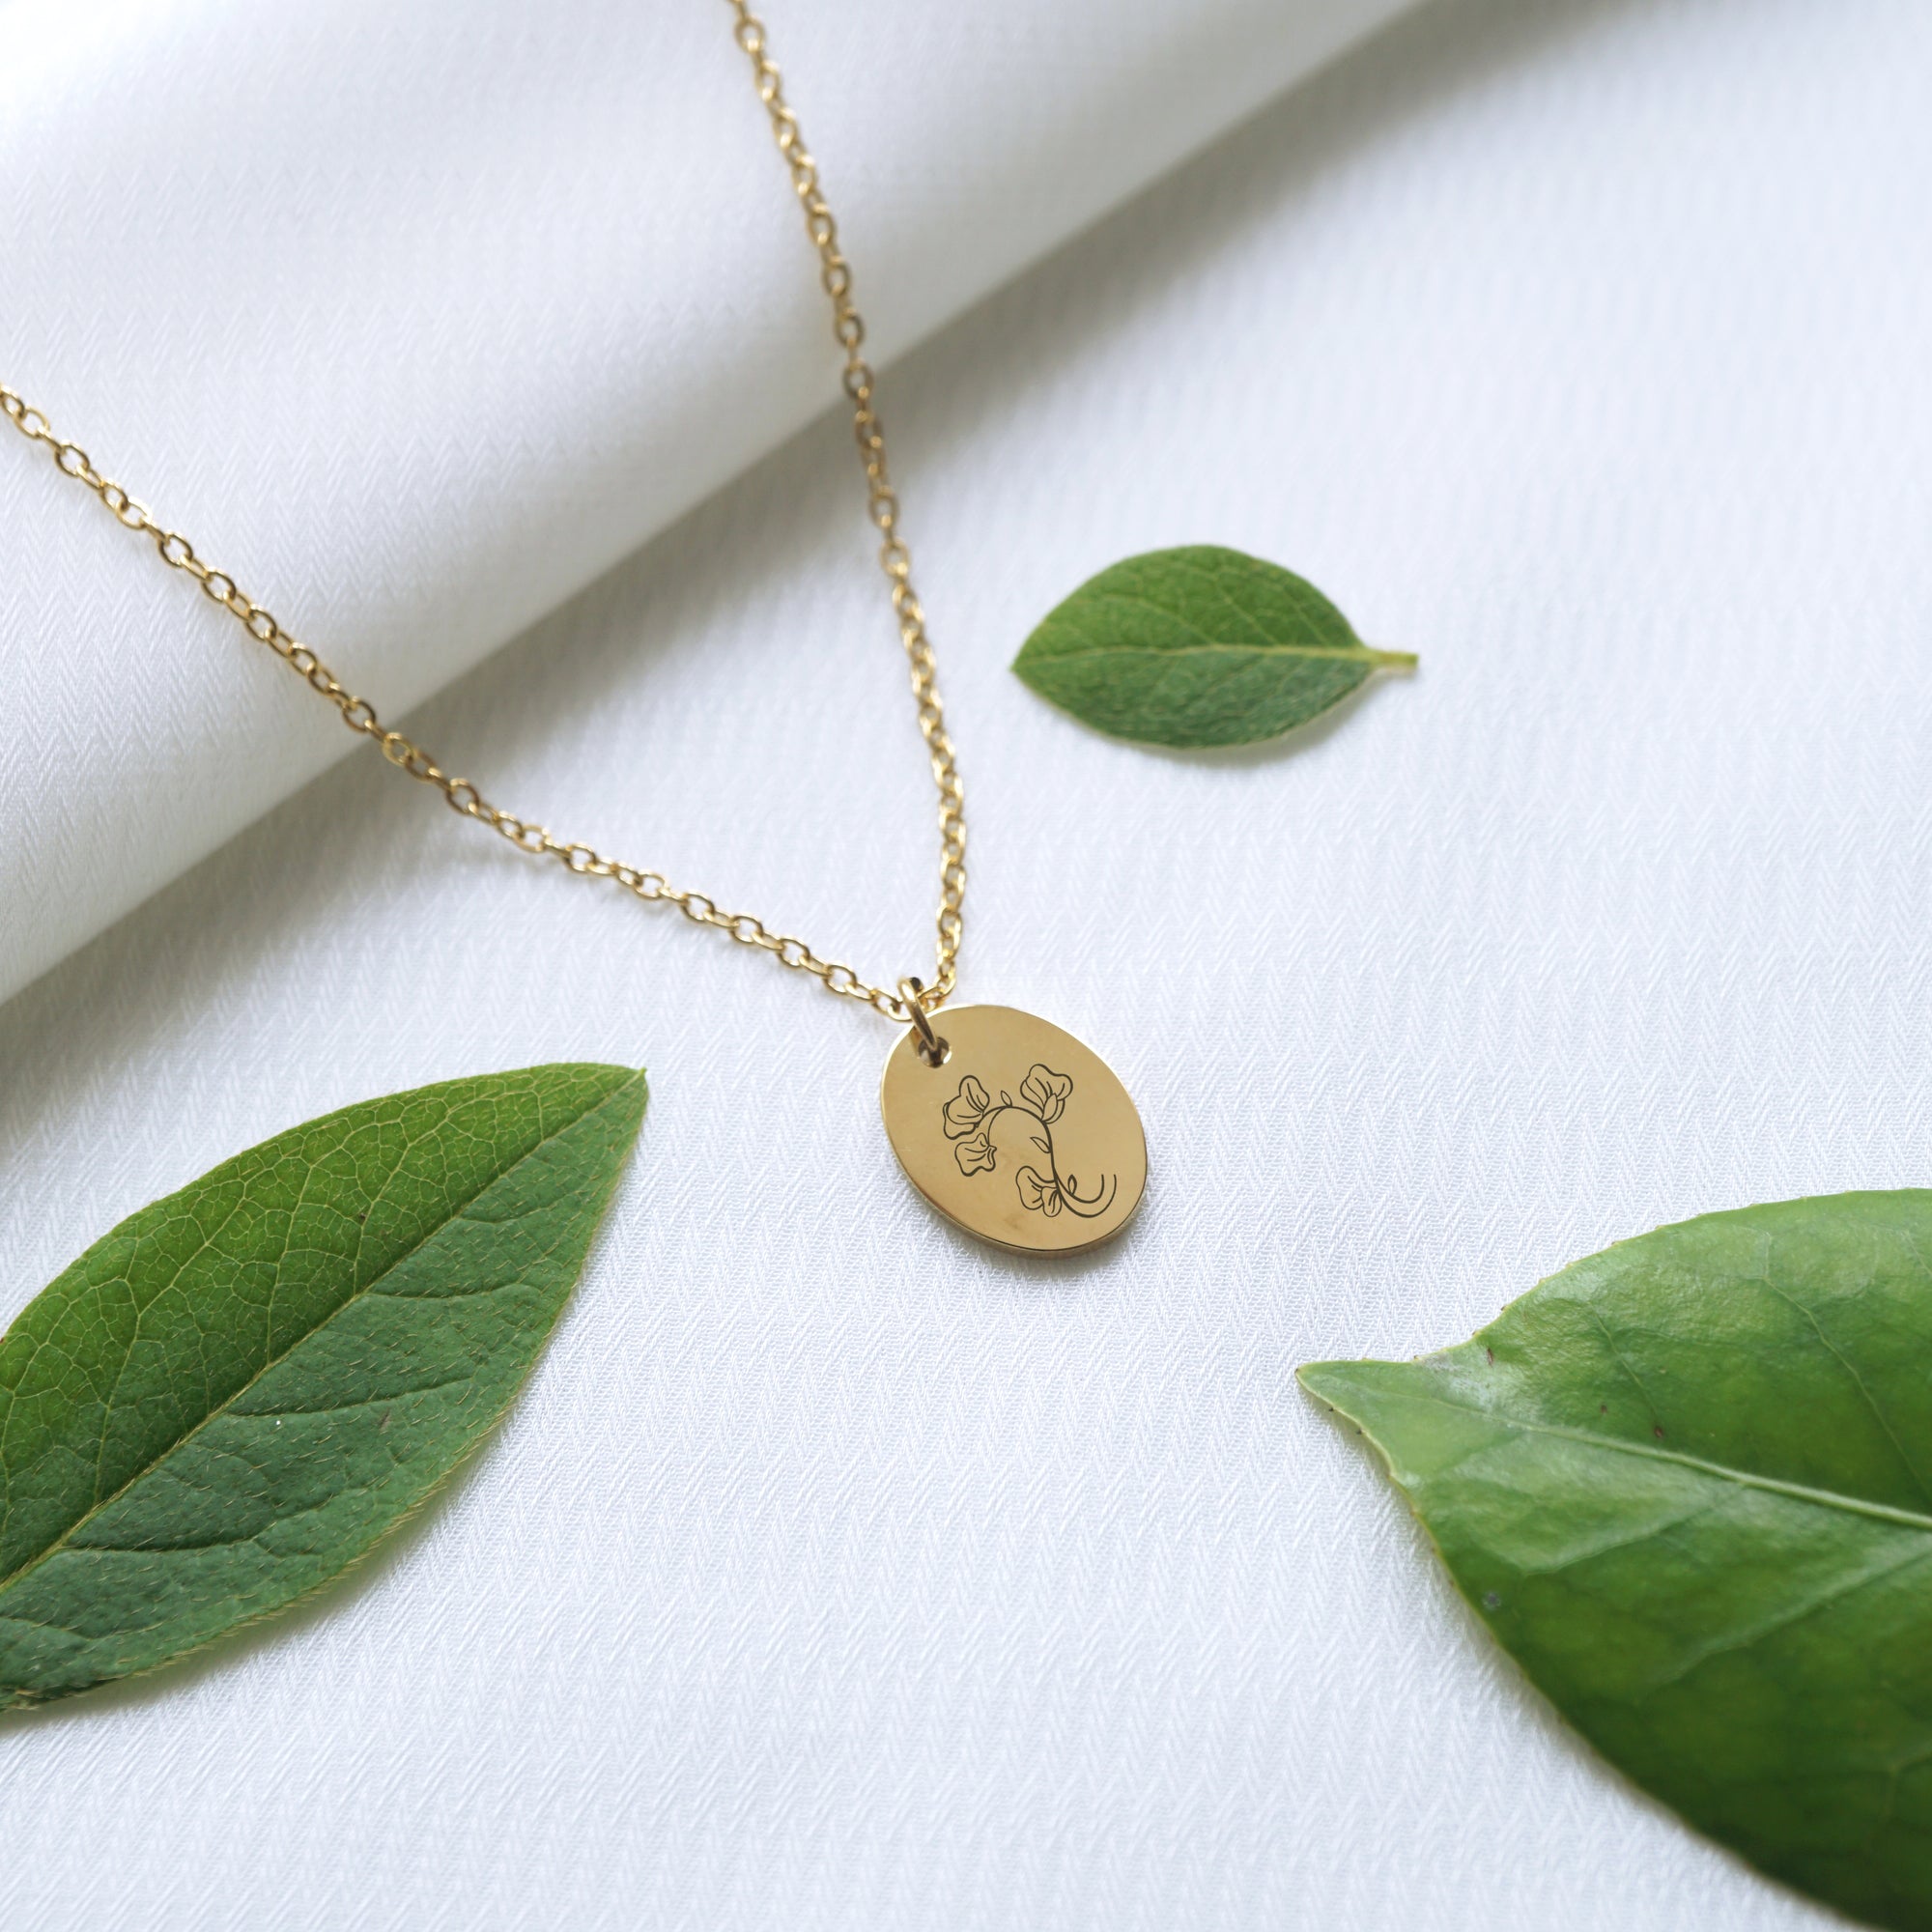 Customized oval tag necklace, engraved birth flower necklace